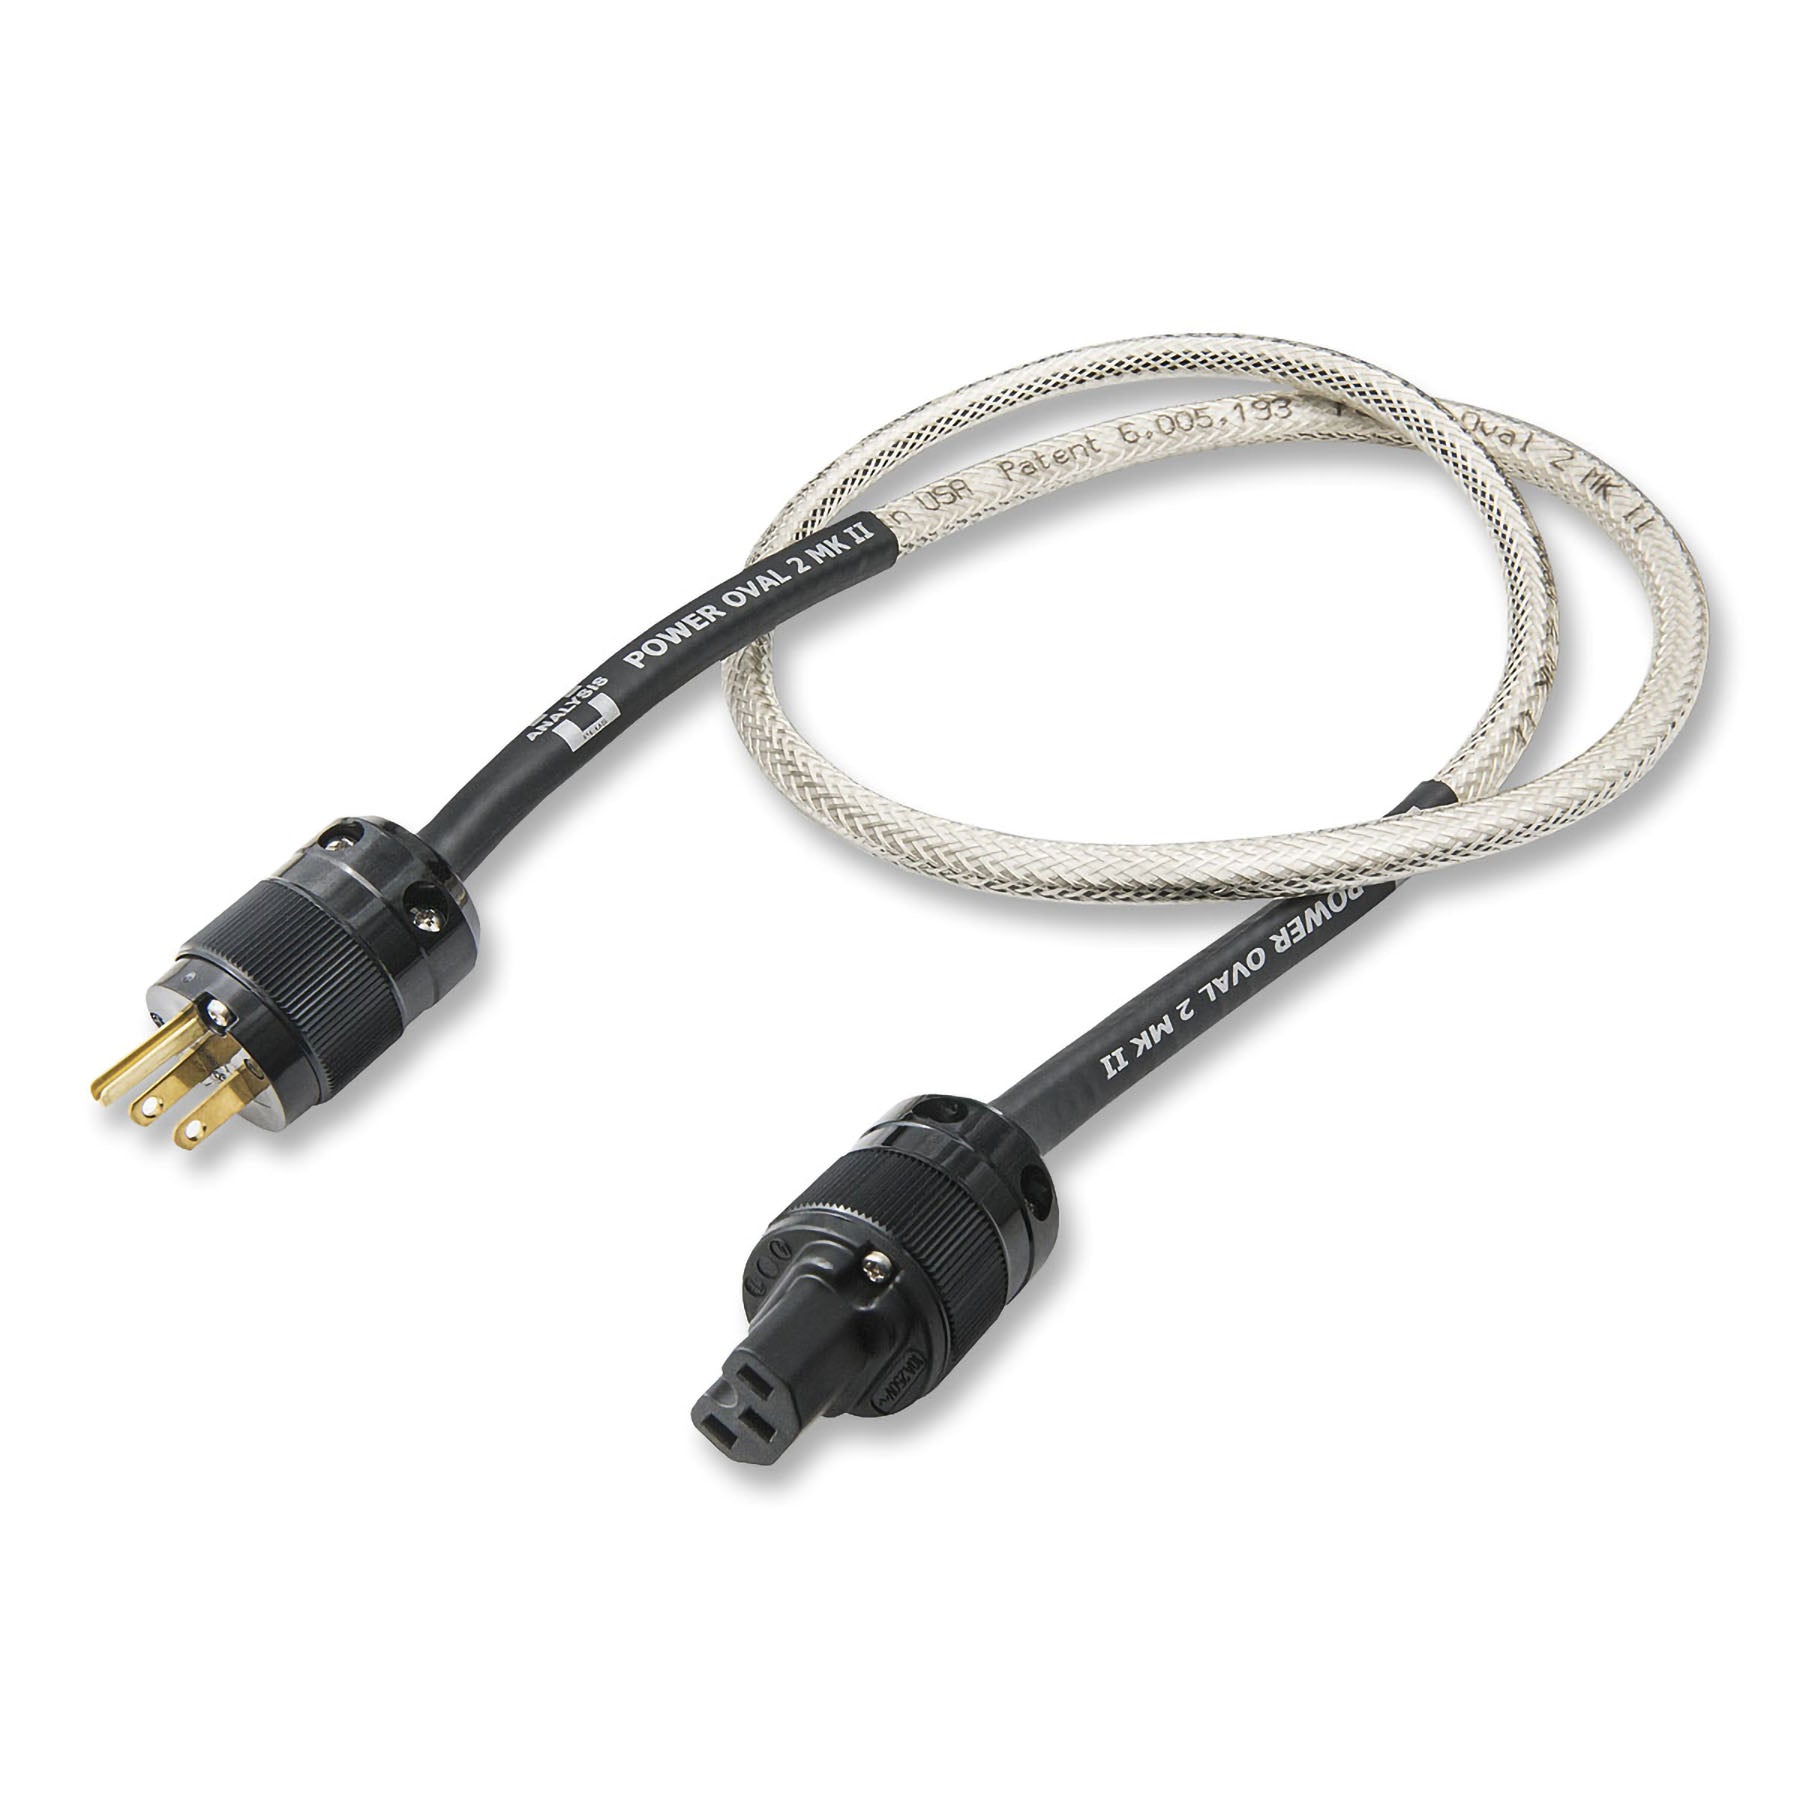 Analysis Plus Power Oval 2 MK II Power Cable